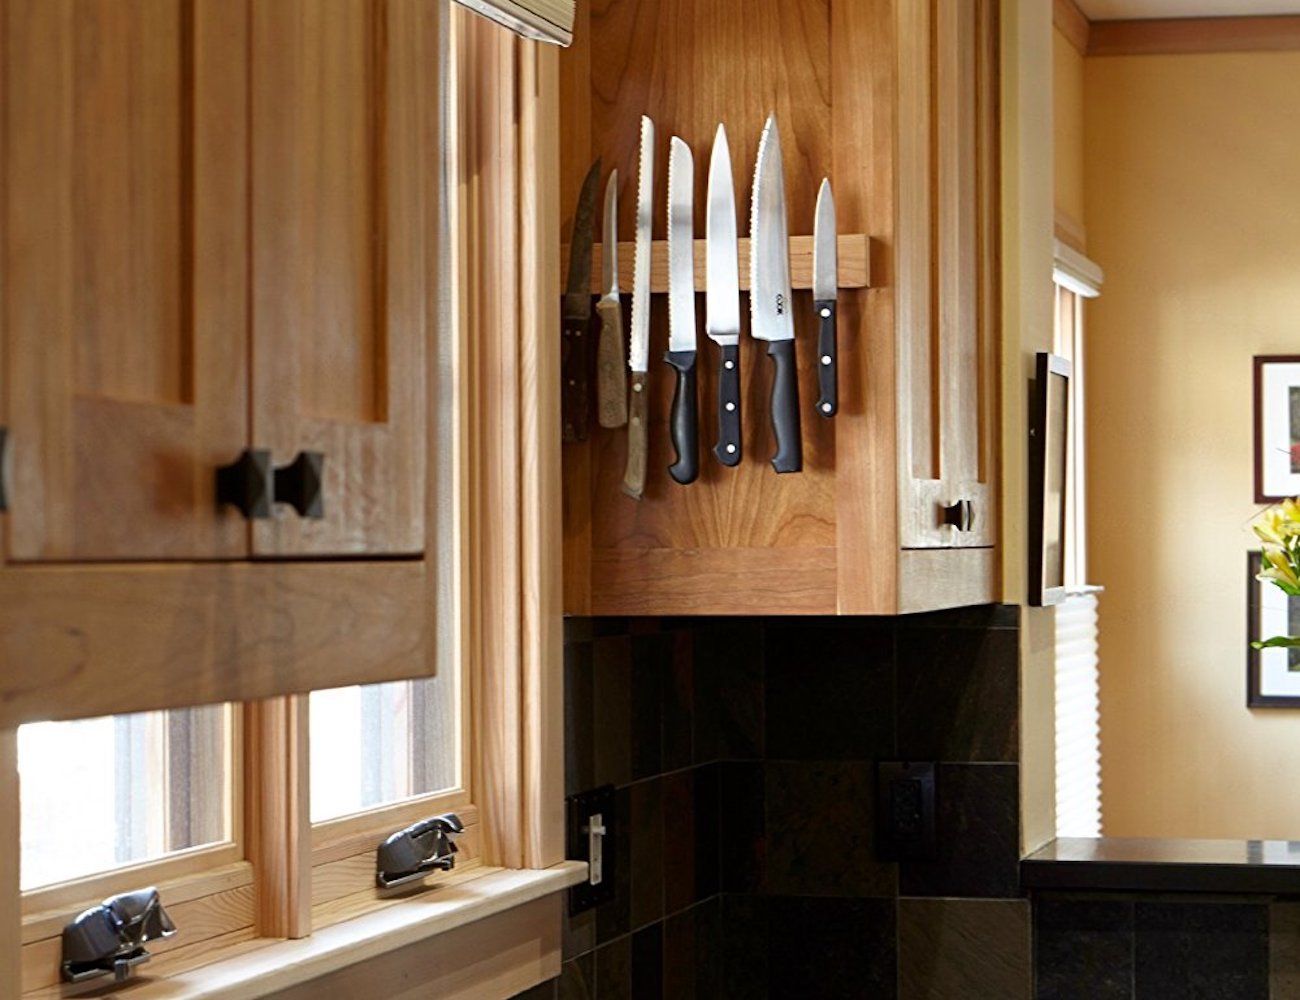 magnetic knife rack in the kitchen where to hang on the side of cabinets